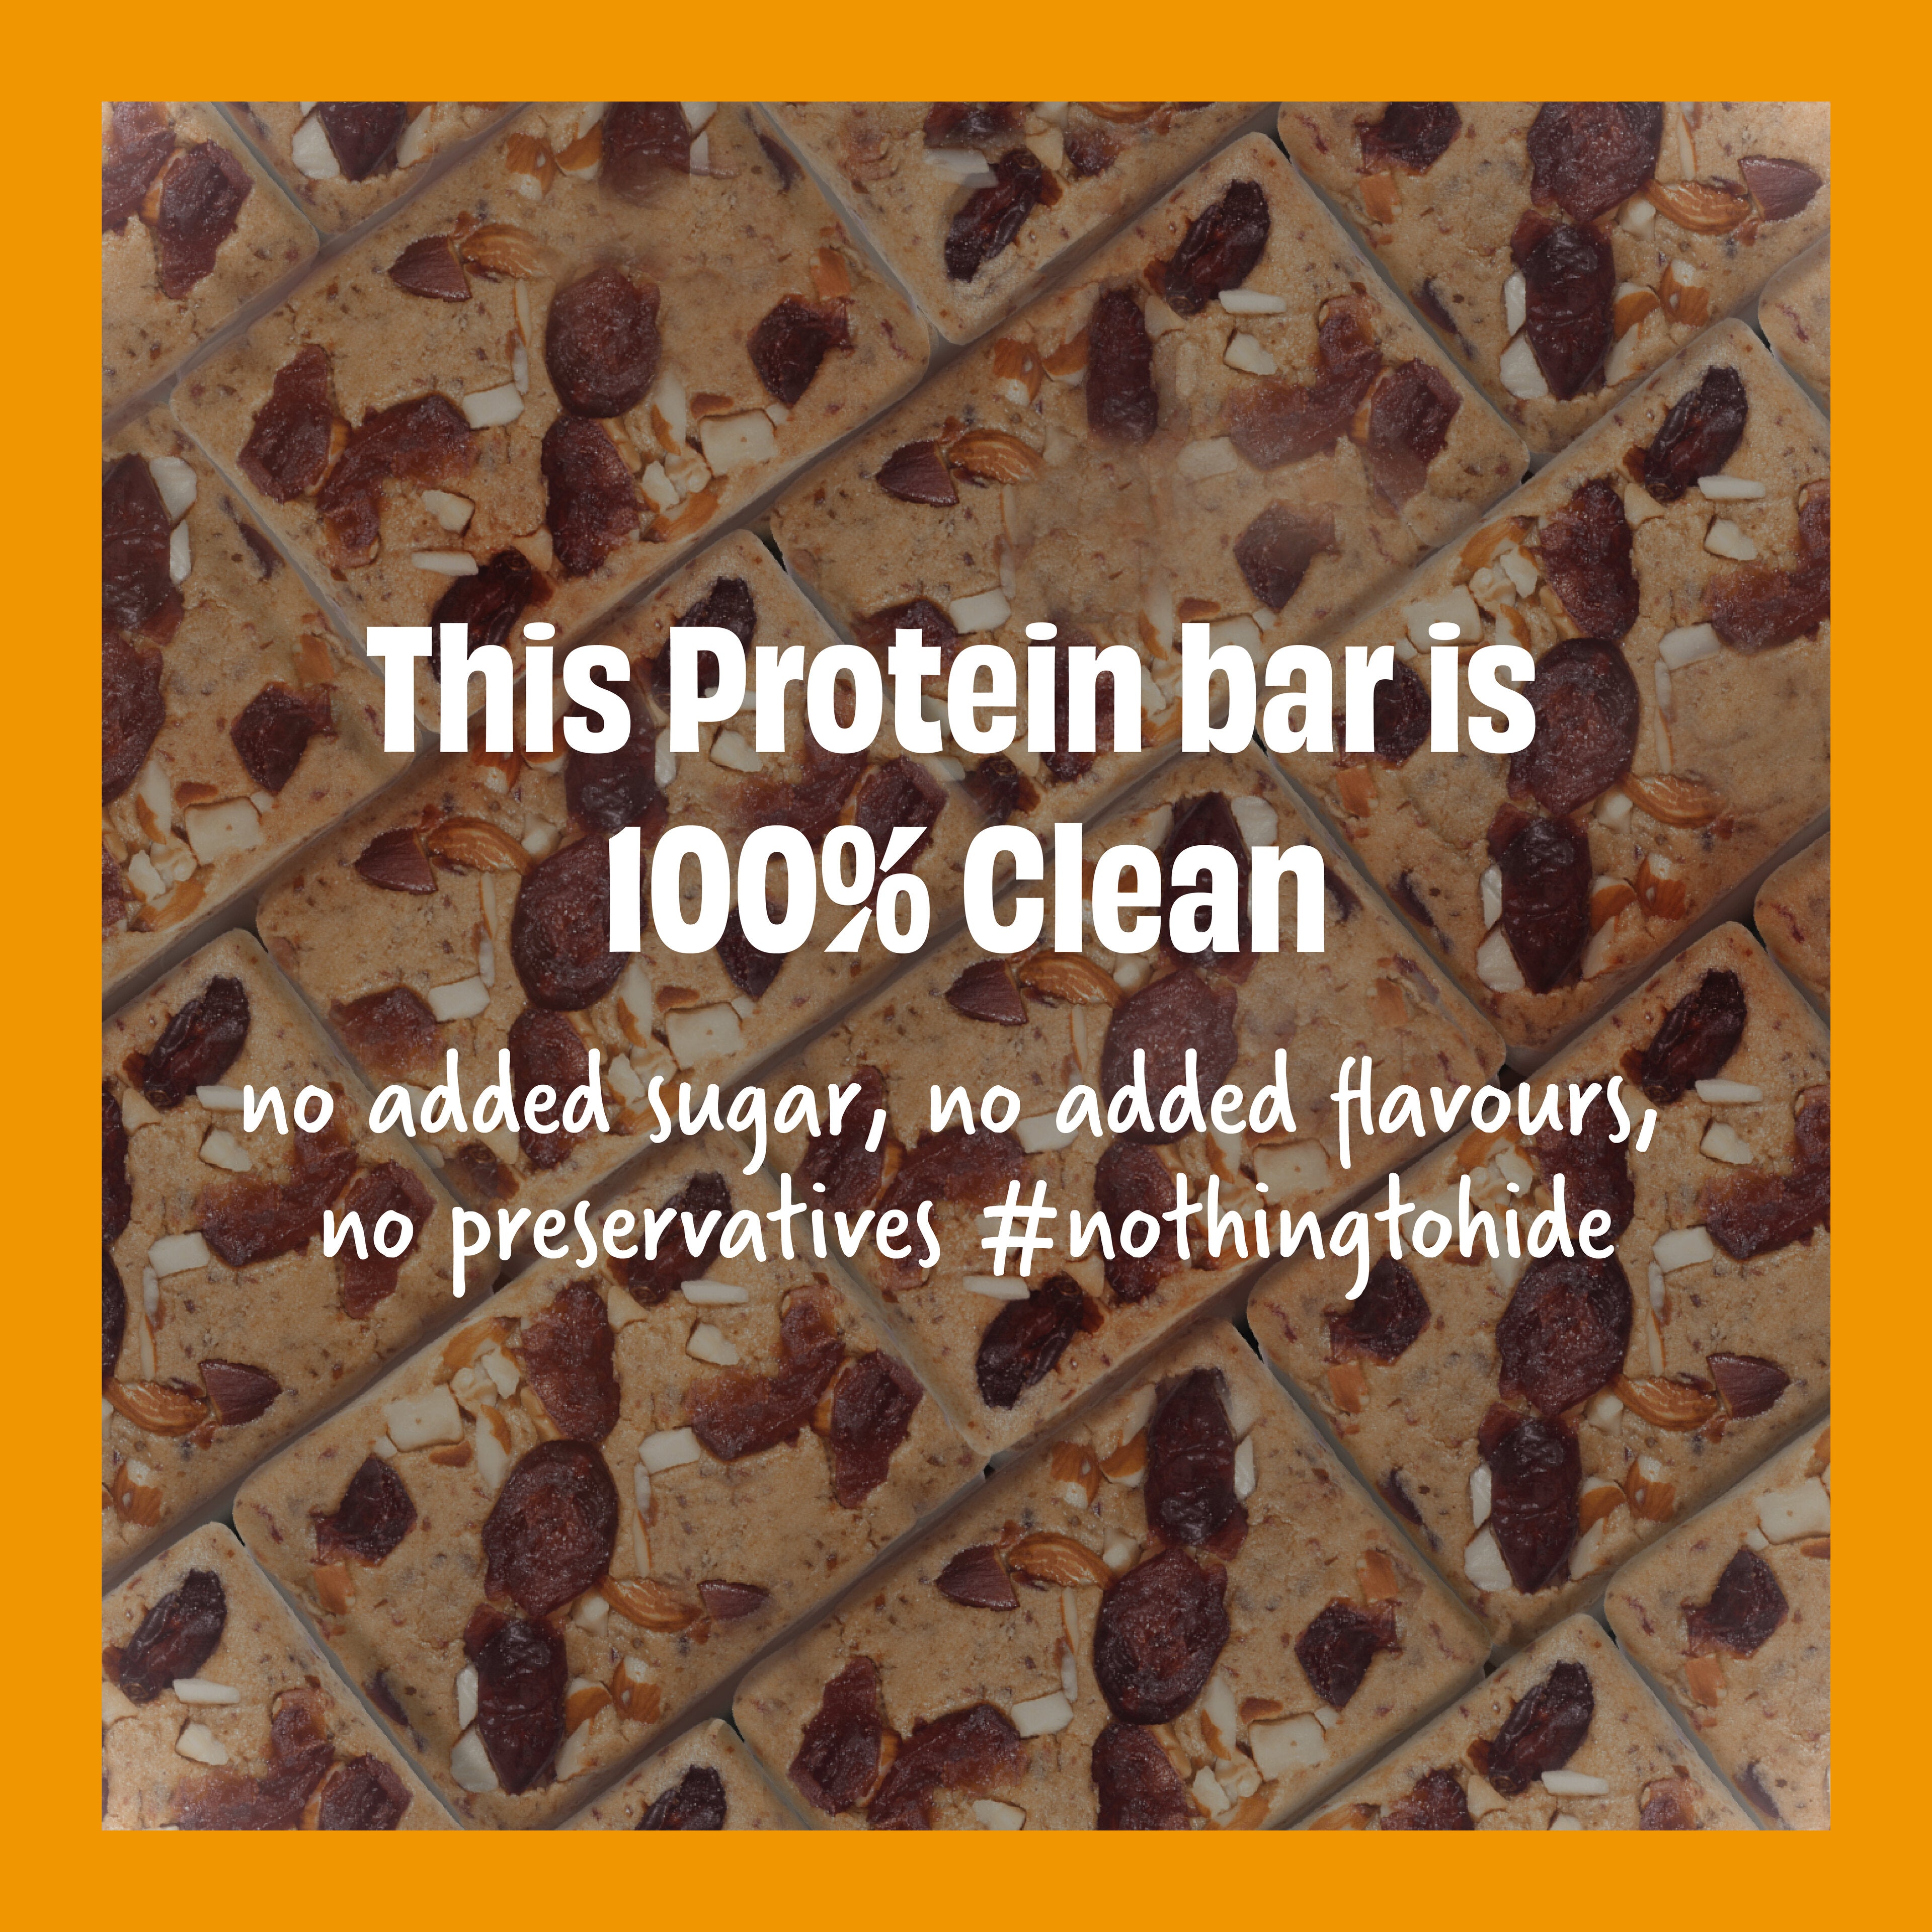 The Whole Truth - Protein Bars - Peanut Butter - Pack of 6 (6 x 52g) - No Added Sugar - All Natural